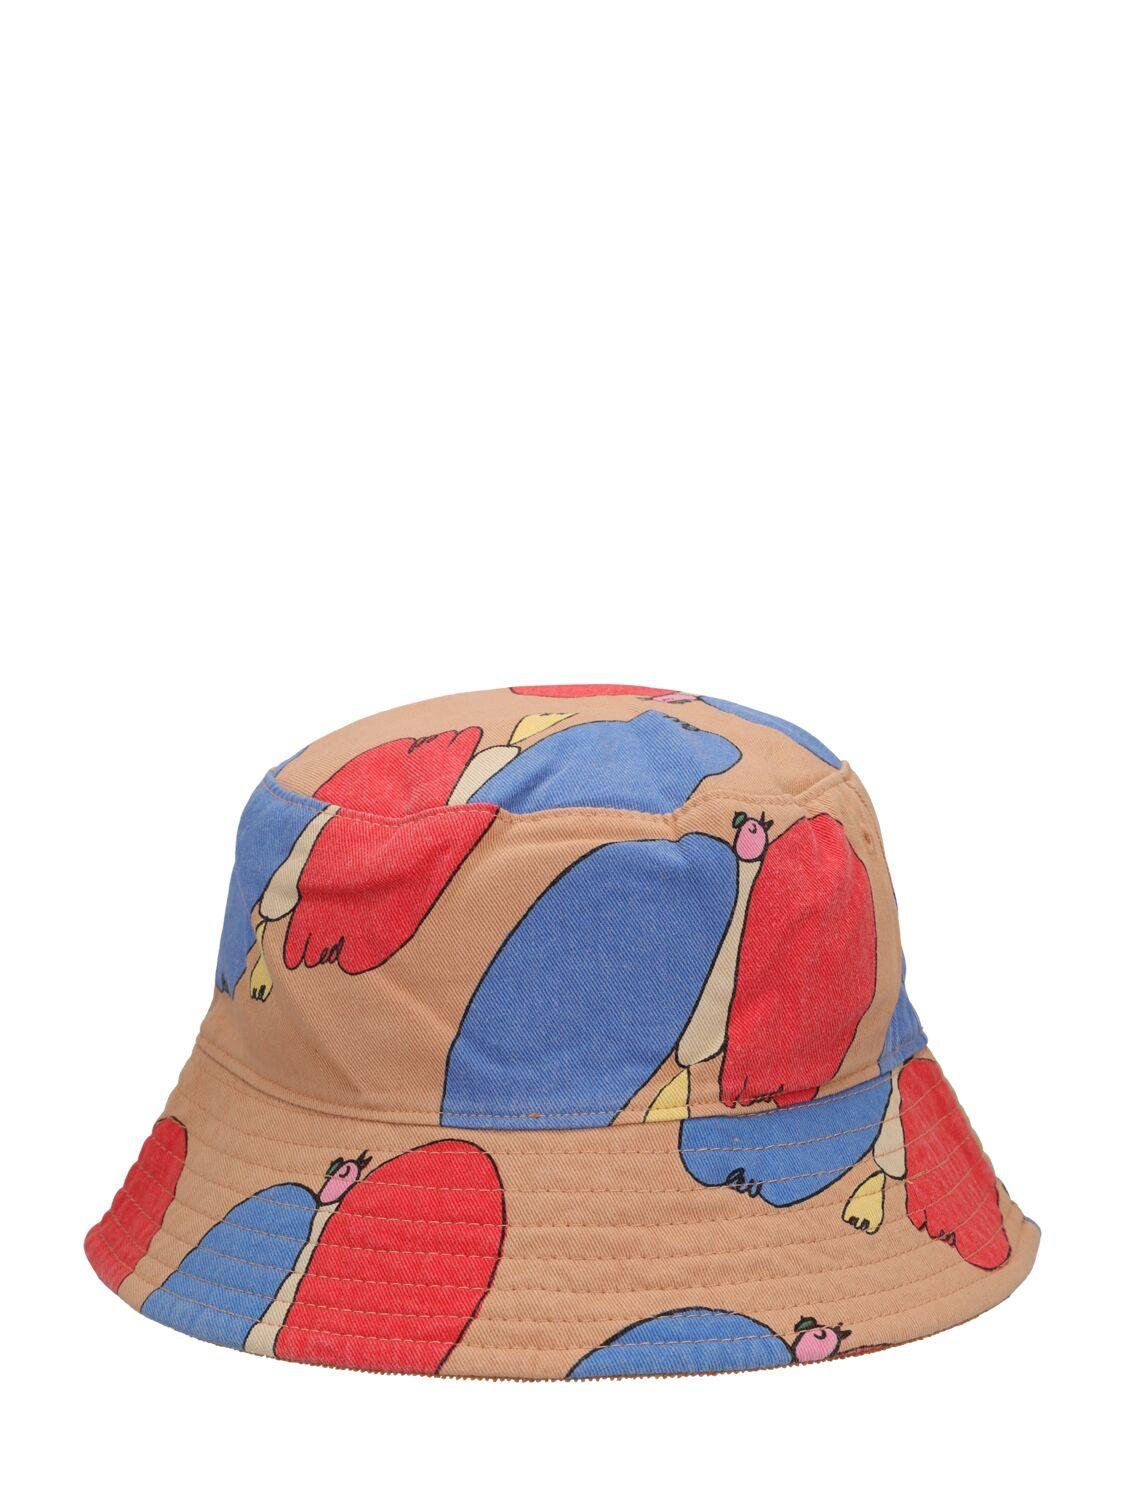 Reversible Cotton & Teddy Bucket Hat by JELLYMALLOW